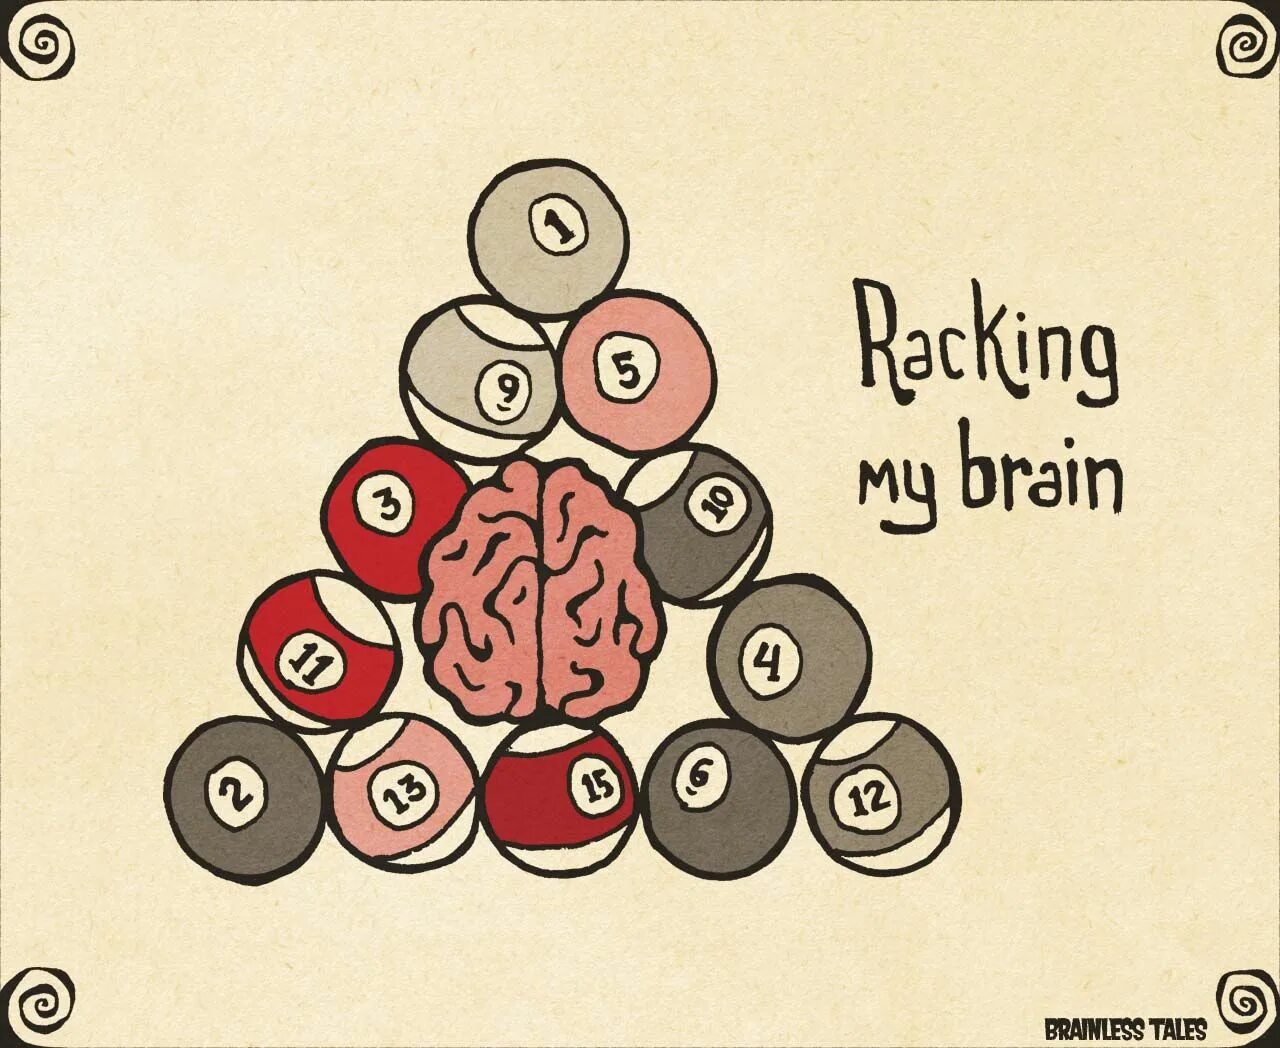 Me and my brain. Rack your Brains. Racking my Brains. My Brain. Rack your Brain/Brains.